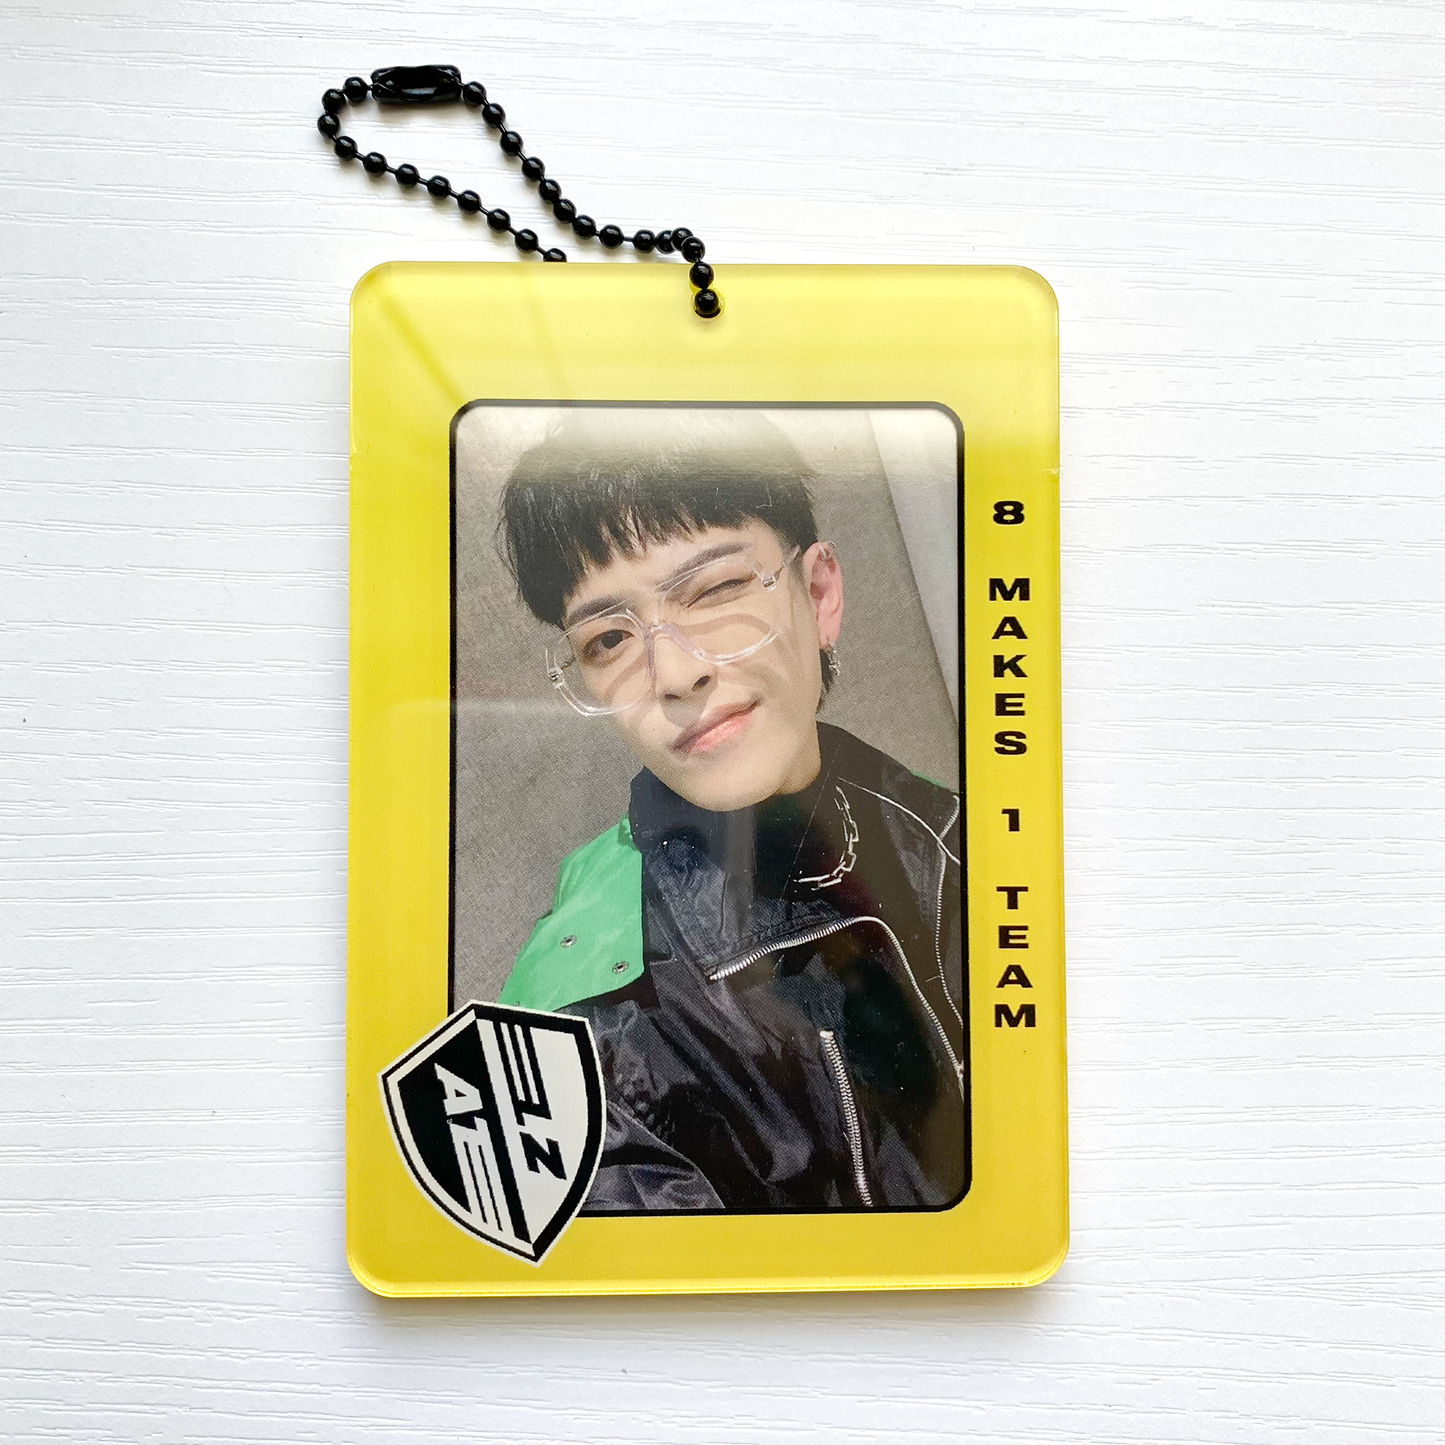 ATEEZ "The Real" Inspired Acrylic Photocard Holder